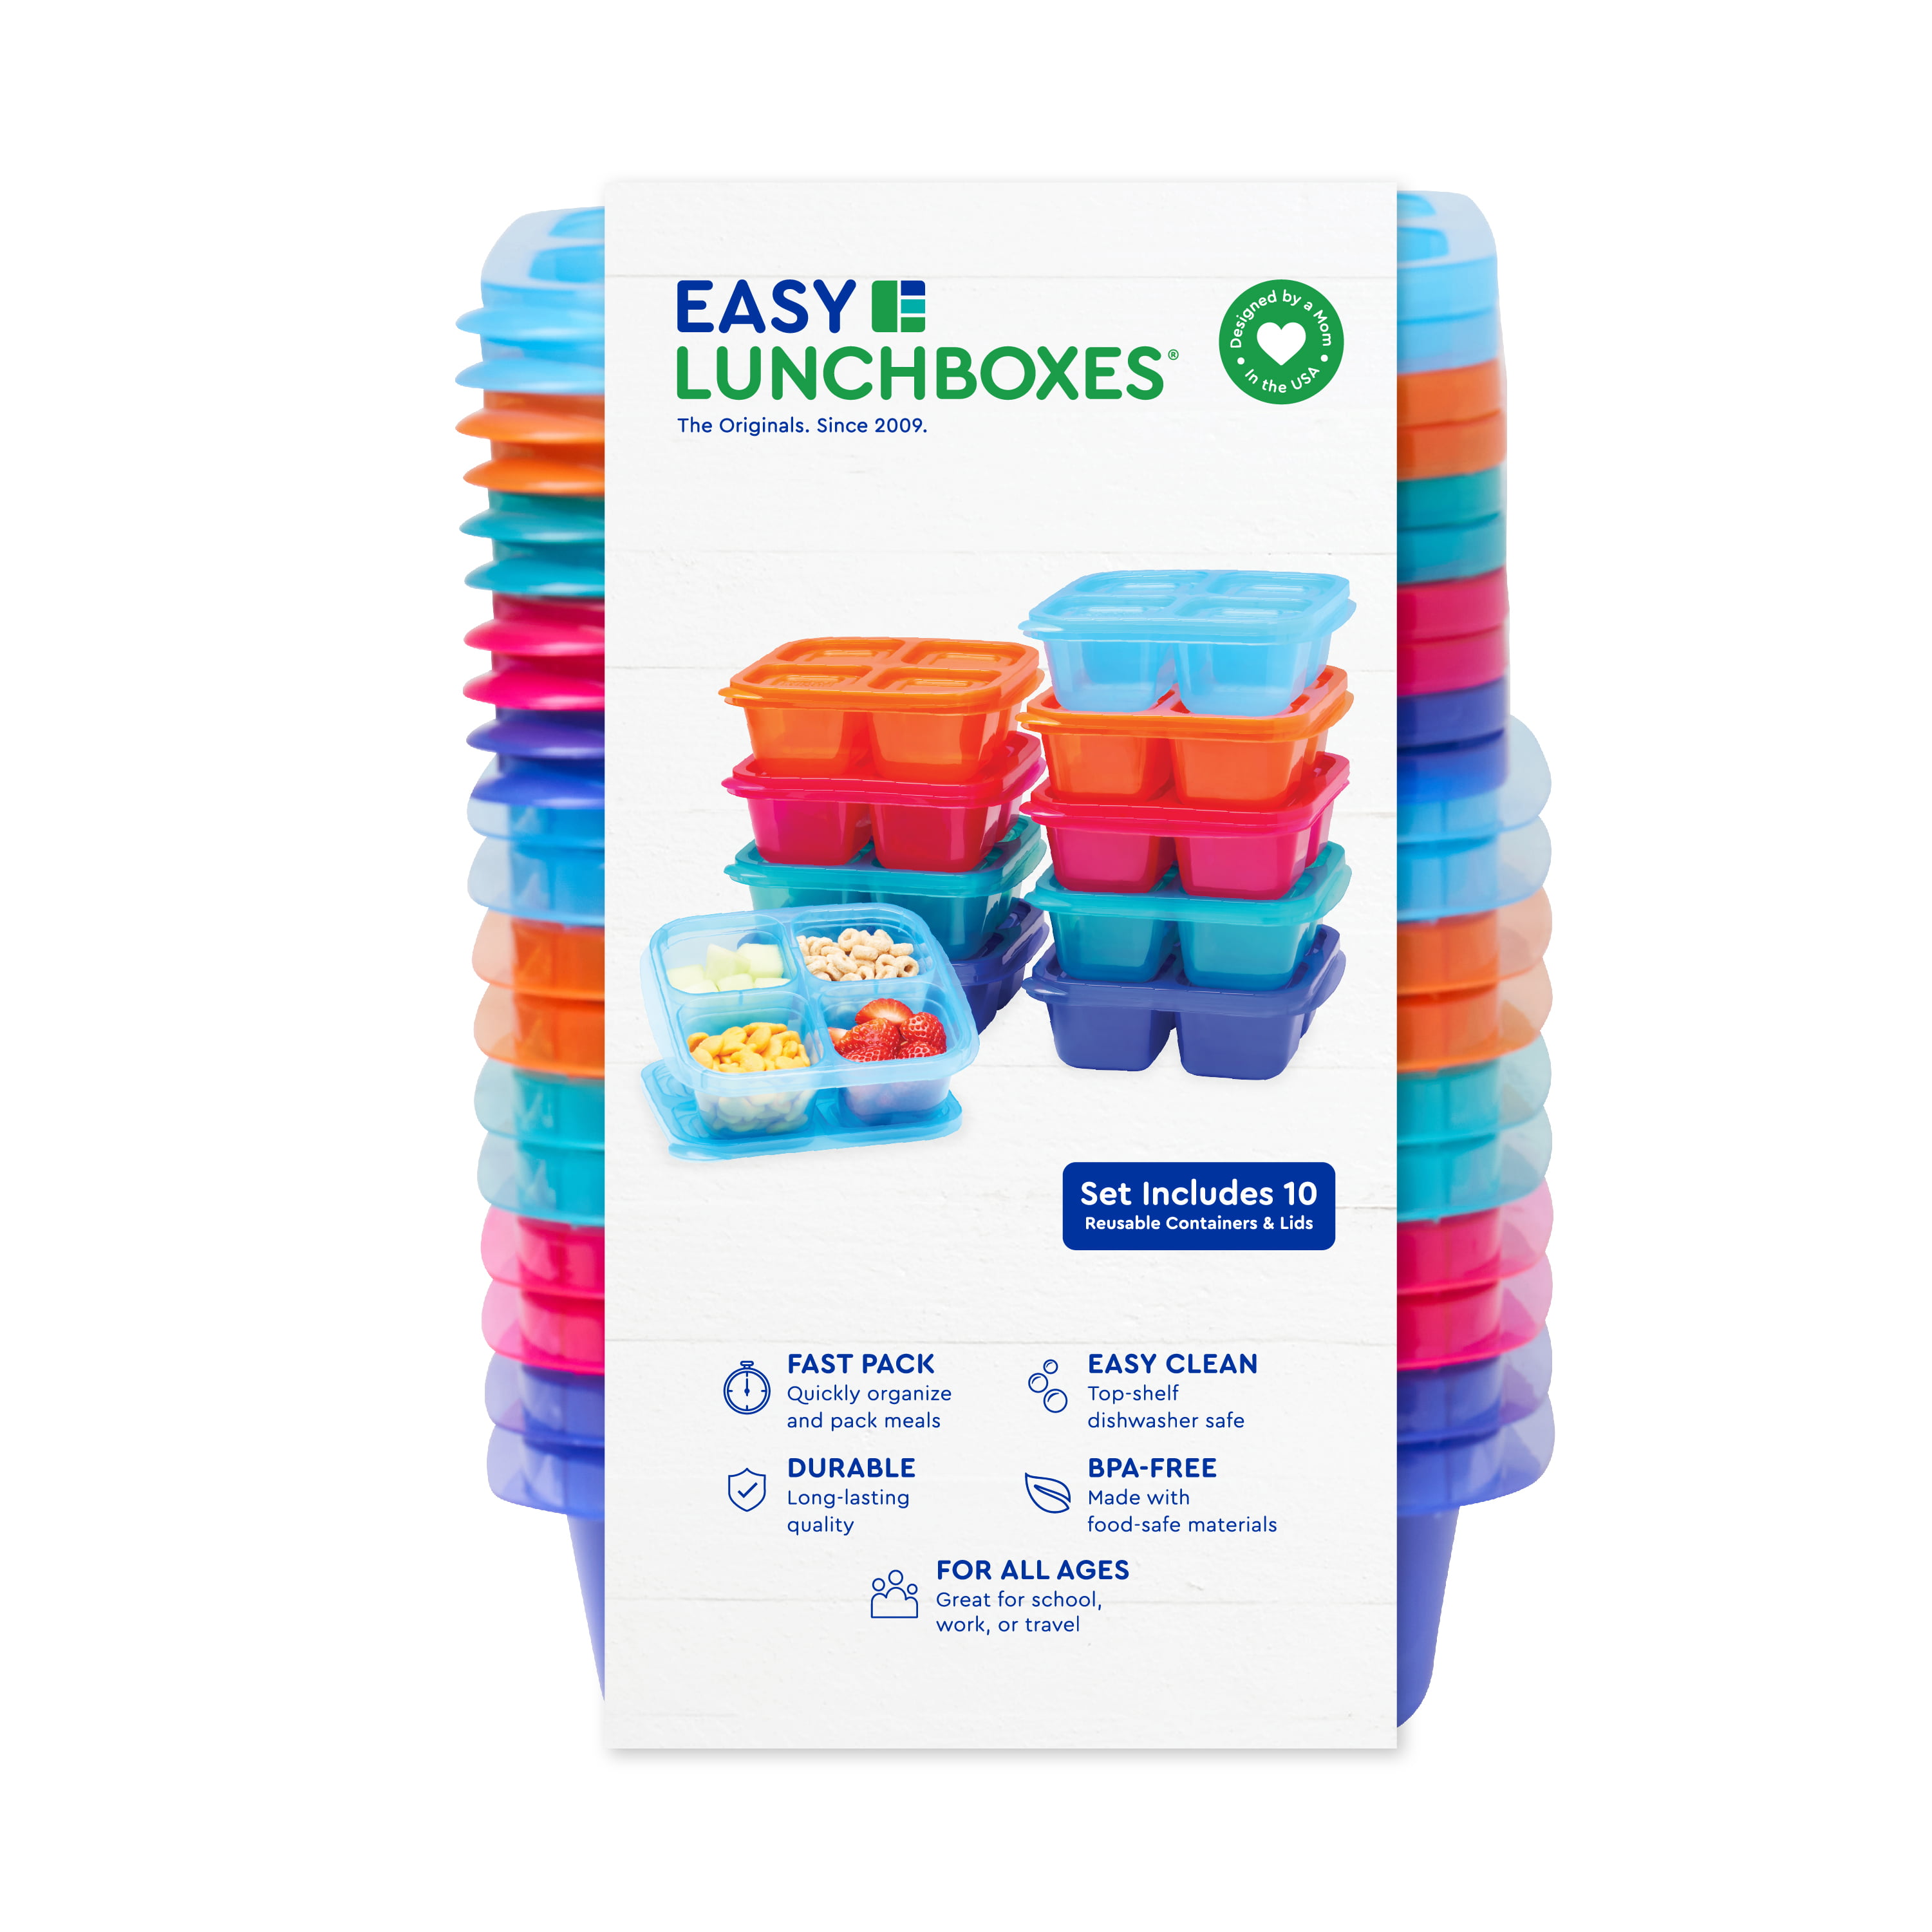  LileZbox 10 Pack Snack Containers for Kids Adults, Reusable  BPA-Free Bento Snack Boxes Meal Prep Lunch Containers, Stackable Food  Storage Containers for School, Work and Picnic (4 Compartment): Home &  Kitchen